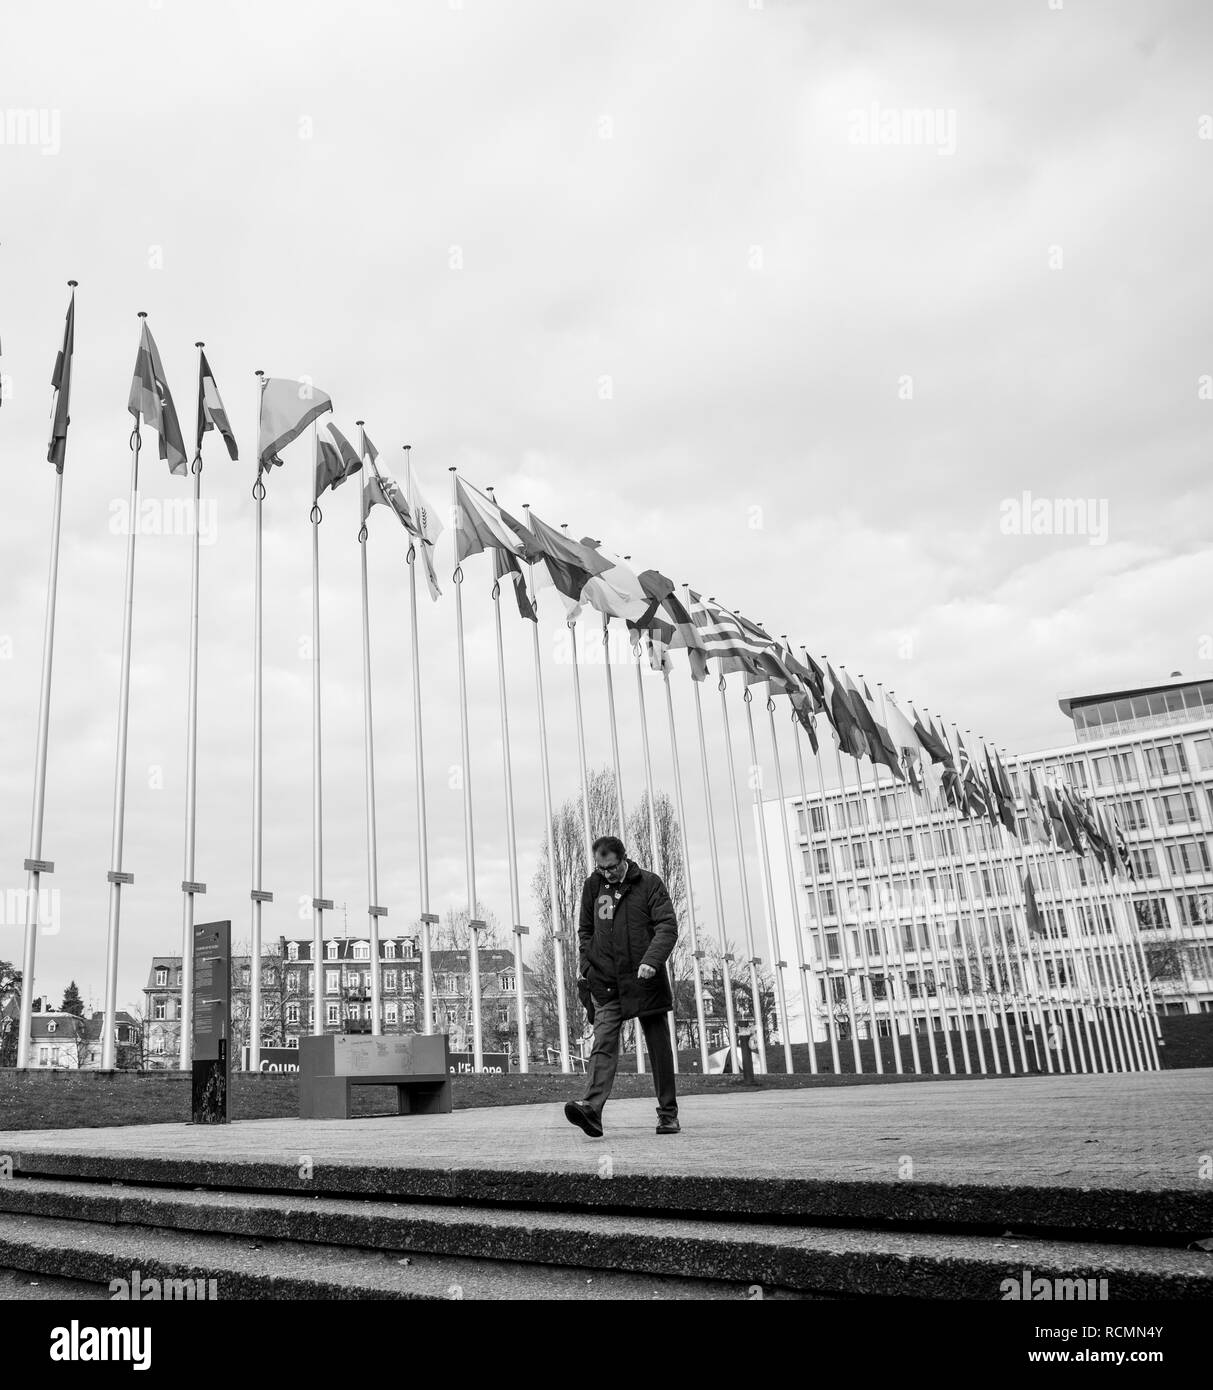 STRASBOURG, FRANCE - MAR 29, 2018: Worker under Flag of Russia flying half-mast at Council of Europe as a tribute and mourning victims of fire at Zimnyaya Vishnya shopping centre Kemerovo Stock Photo